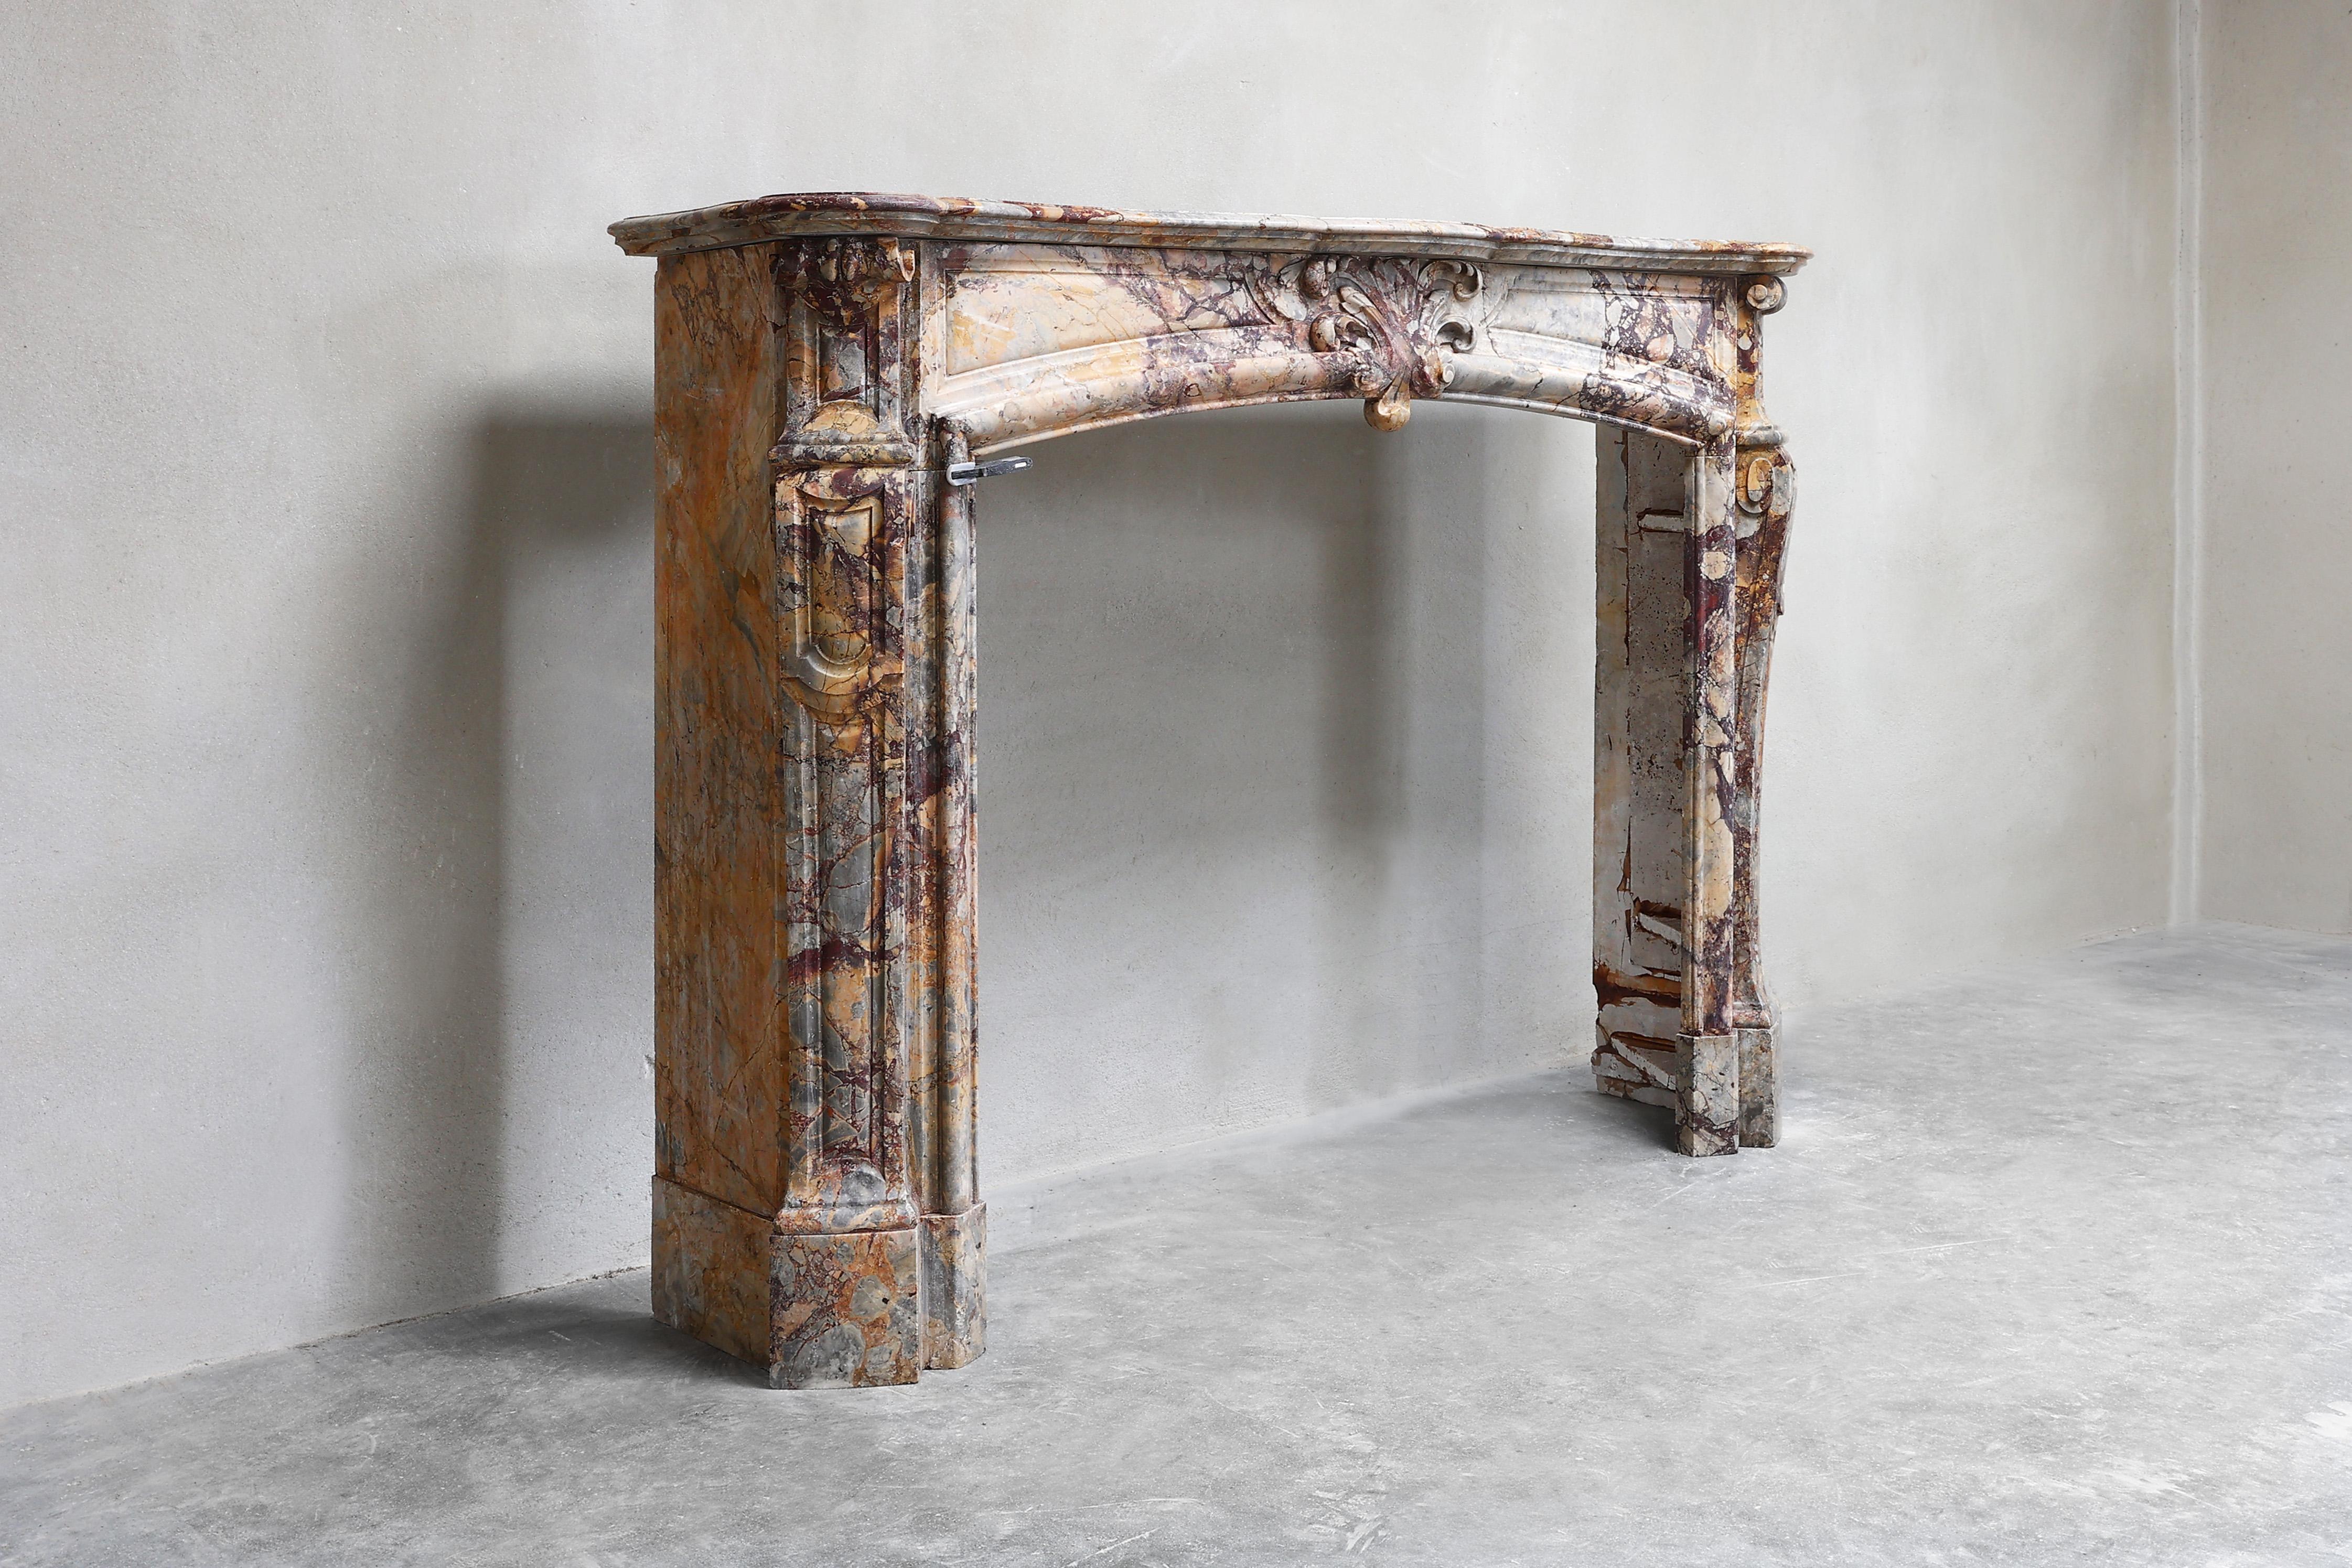 Beautiful antique fireplace made of Breche de Medou marble in the style of Regence Pompadour. A fireplace made of a special colorful marble from France! This fireplace dates from 1870-1880. A beautiful piece of furniture for any interior!